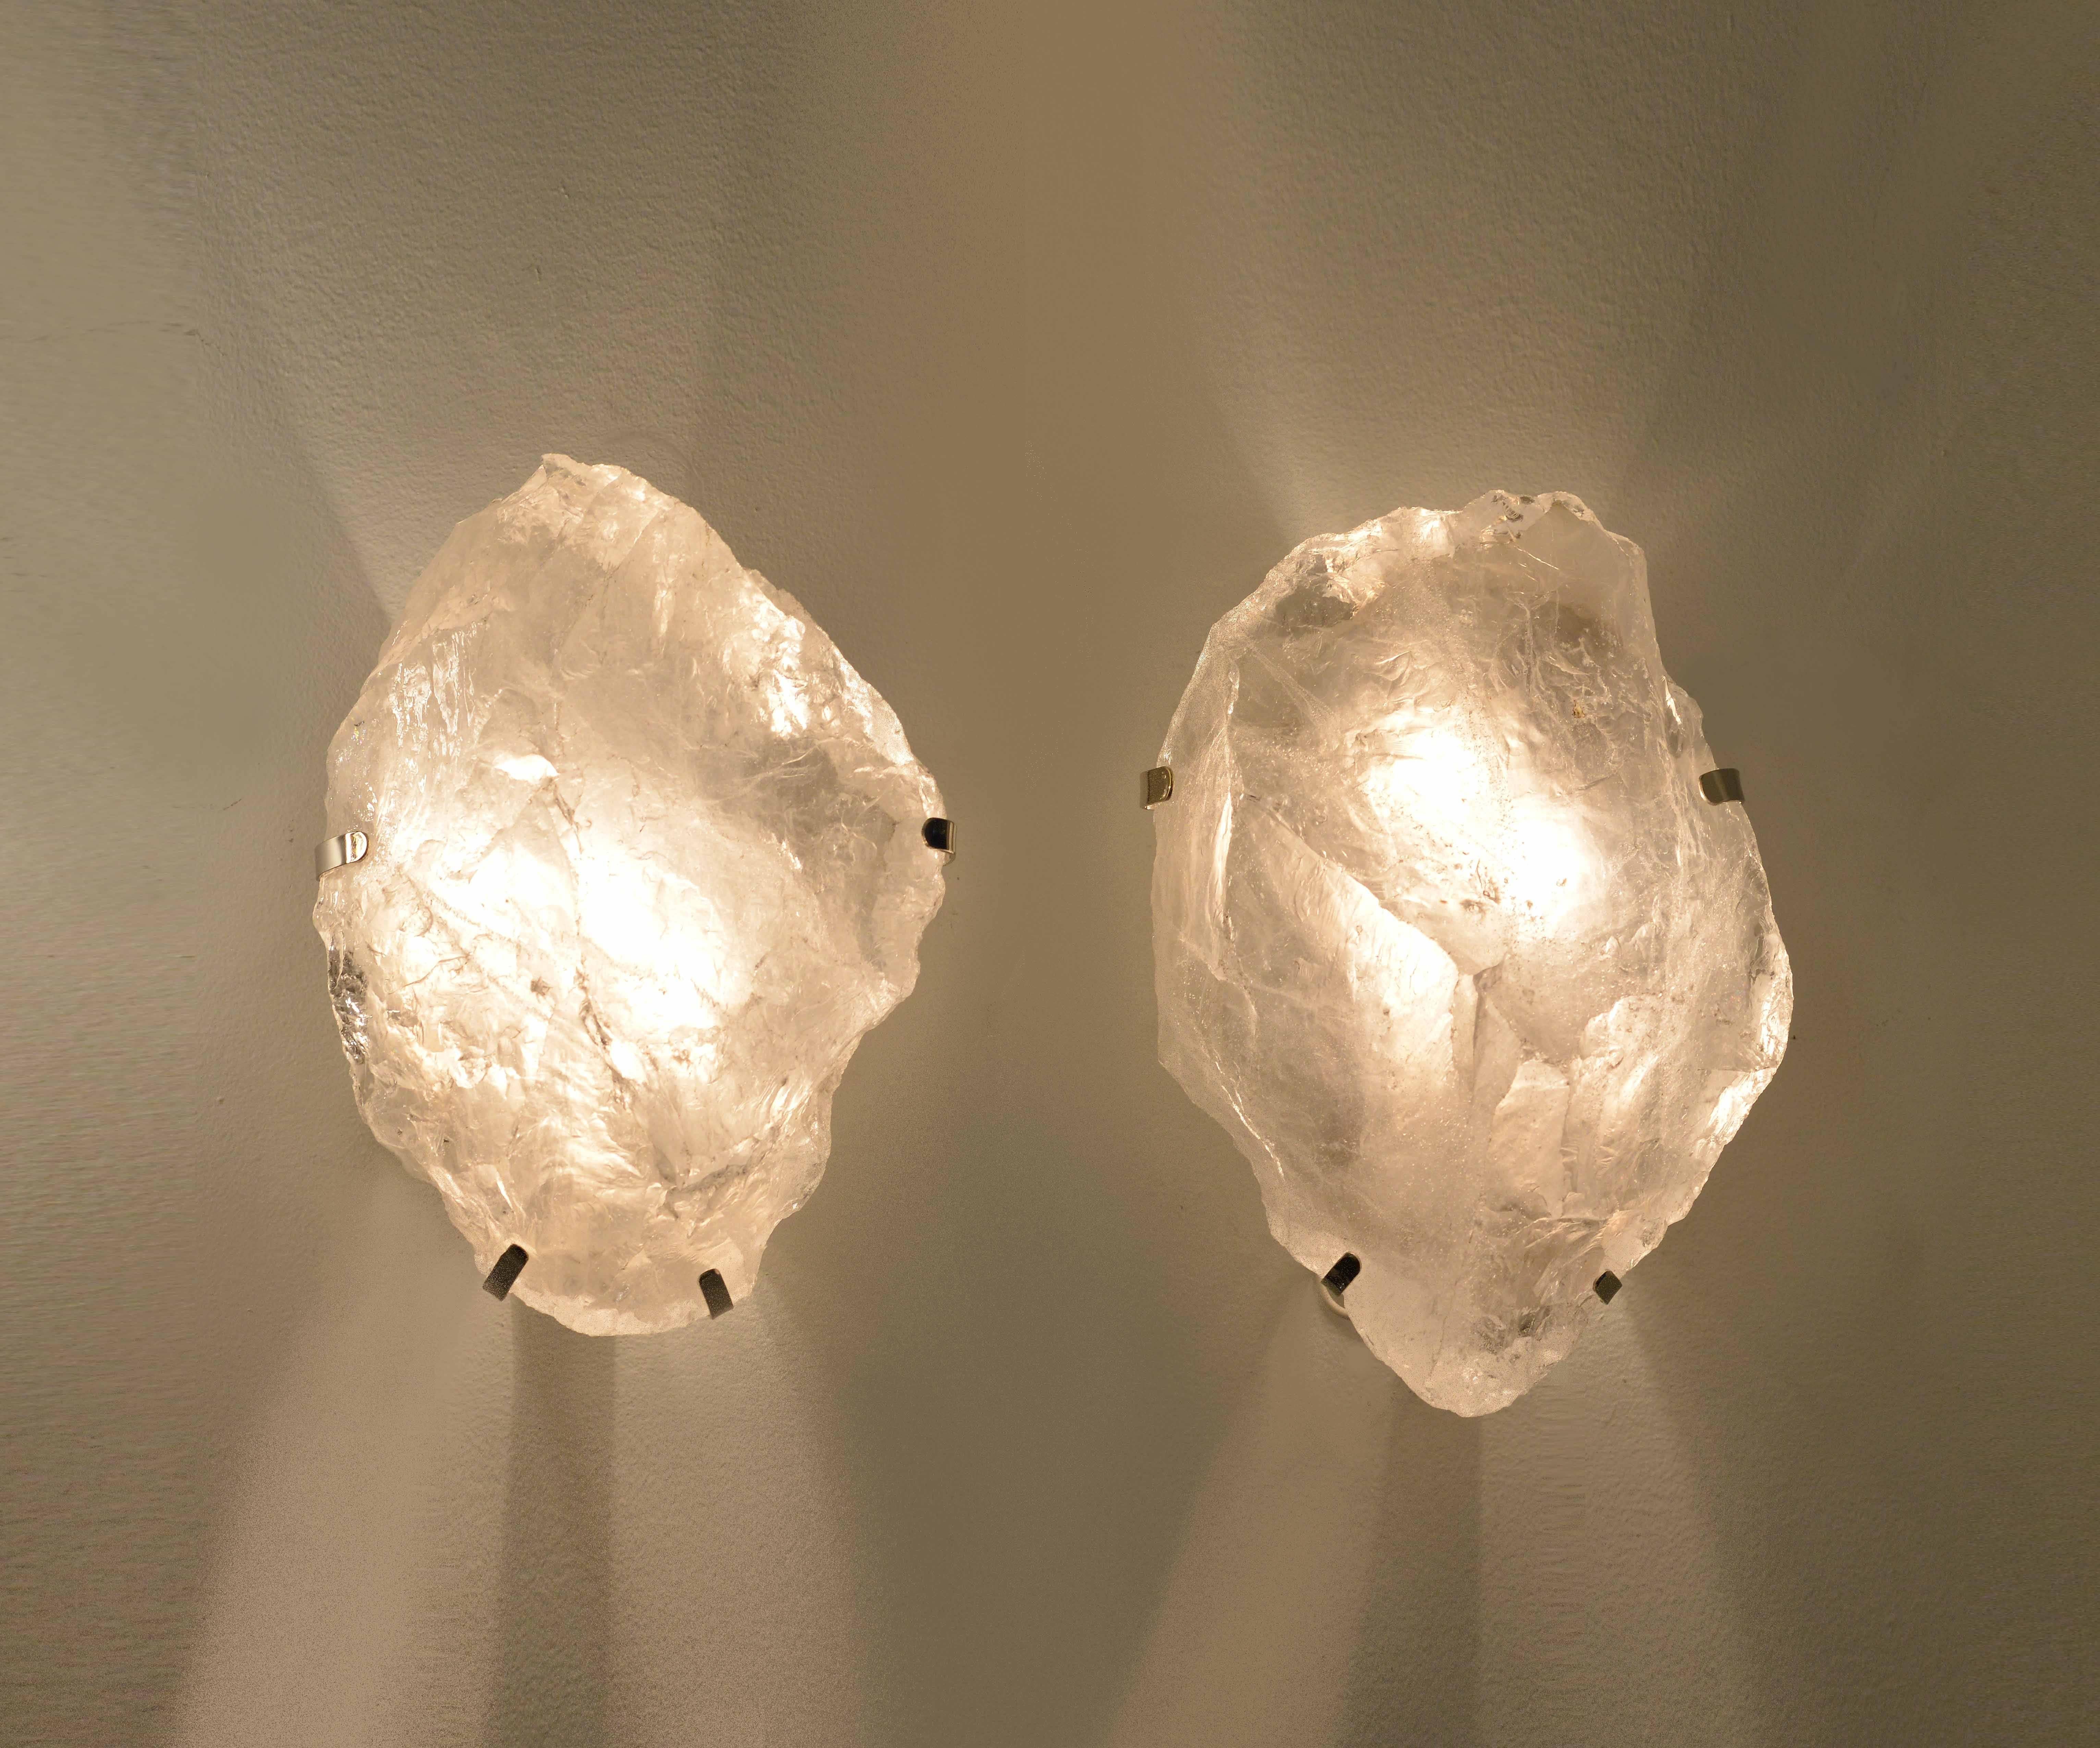 Pair of natural rock crystal quartz wall sconces with nickel plating, mounted. 

Wall sconces installed with two sockets, 60 watt each socket, total of 120 watt maximum.
 